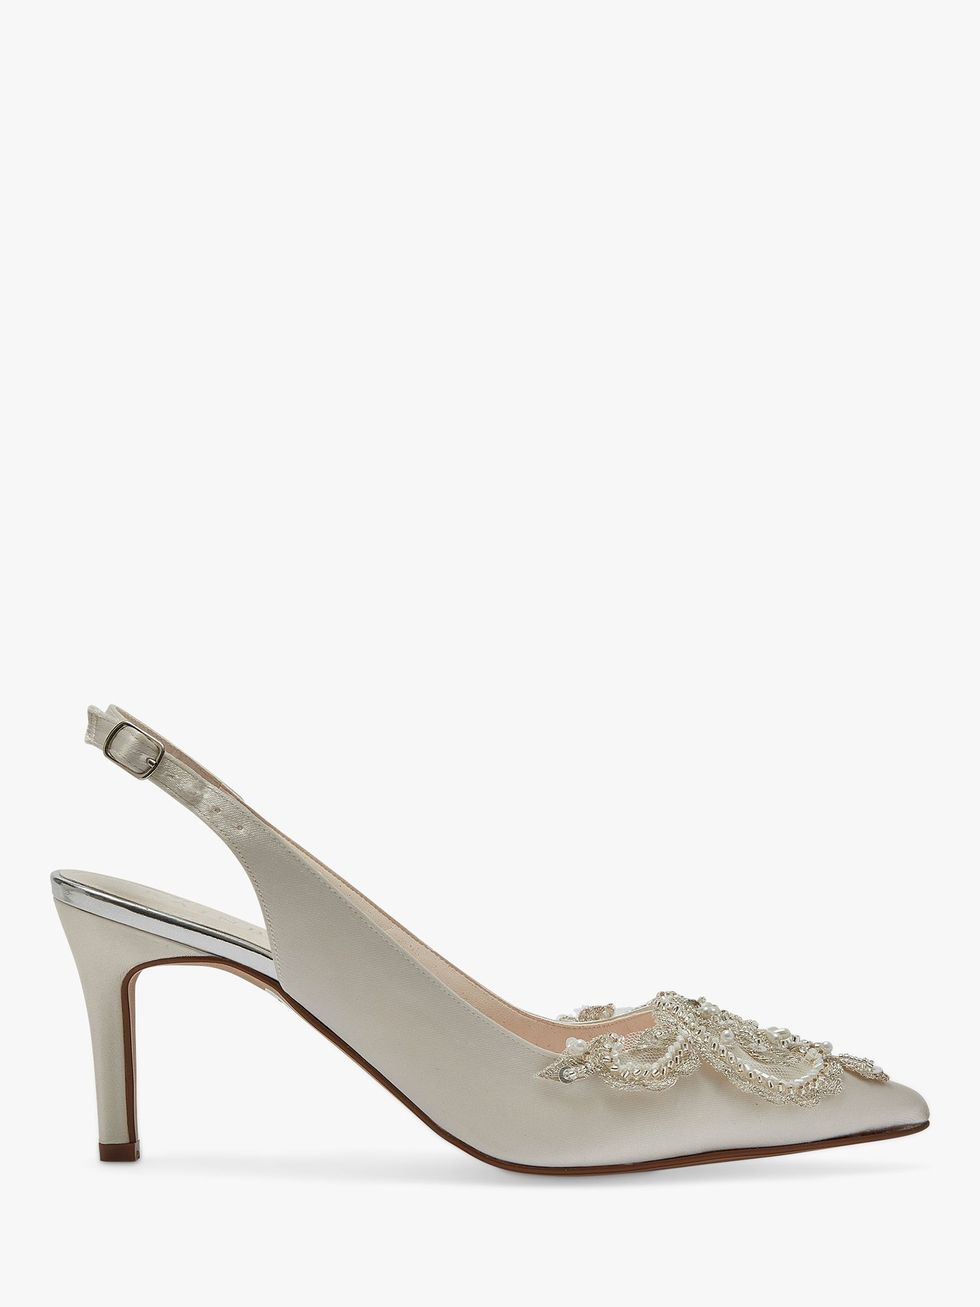 18 Best Wedding Shoes and Where to Find Your Perfect Pair